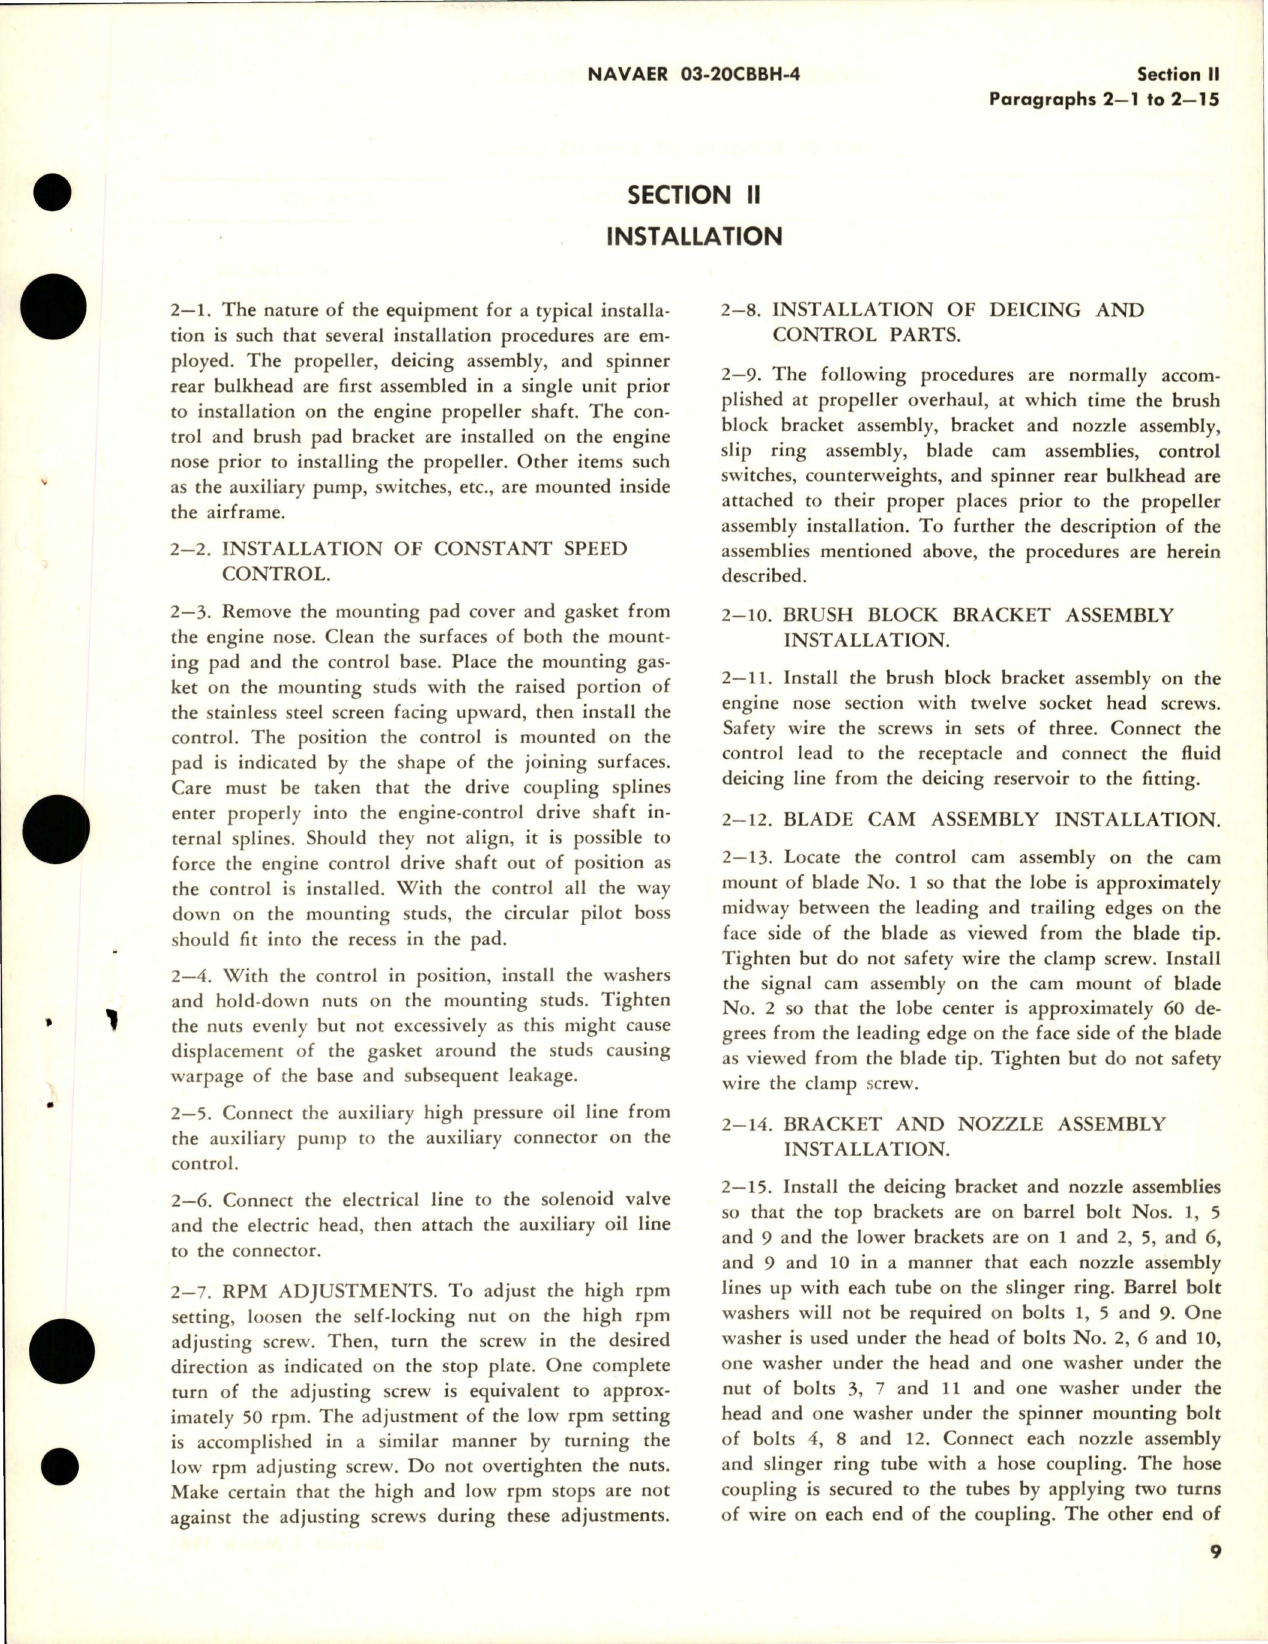 Sample page 7 from AirCorps Library document: Operation and Maintenance Instructions for Variable Pitch Propeller - Models 43H60-359, 43H60-383, and 43H60-395